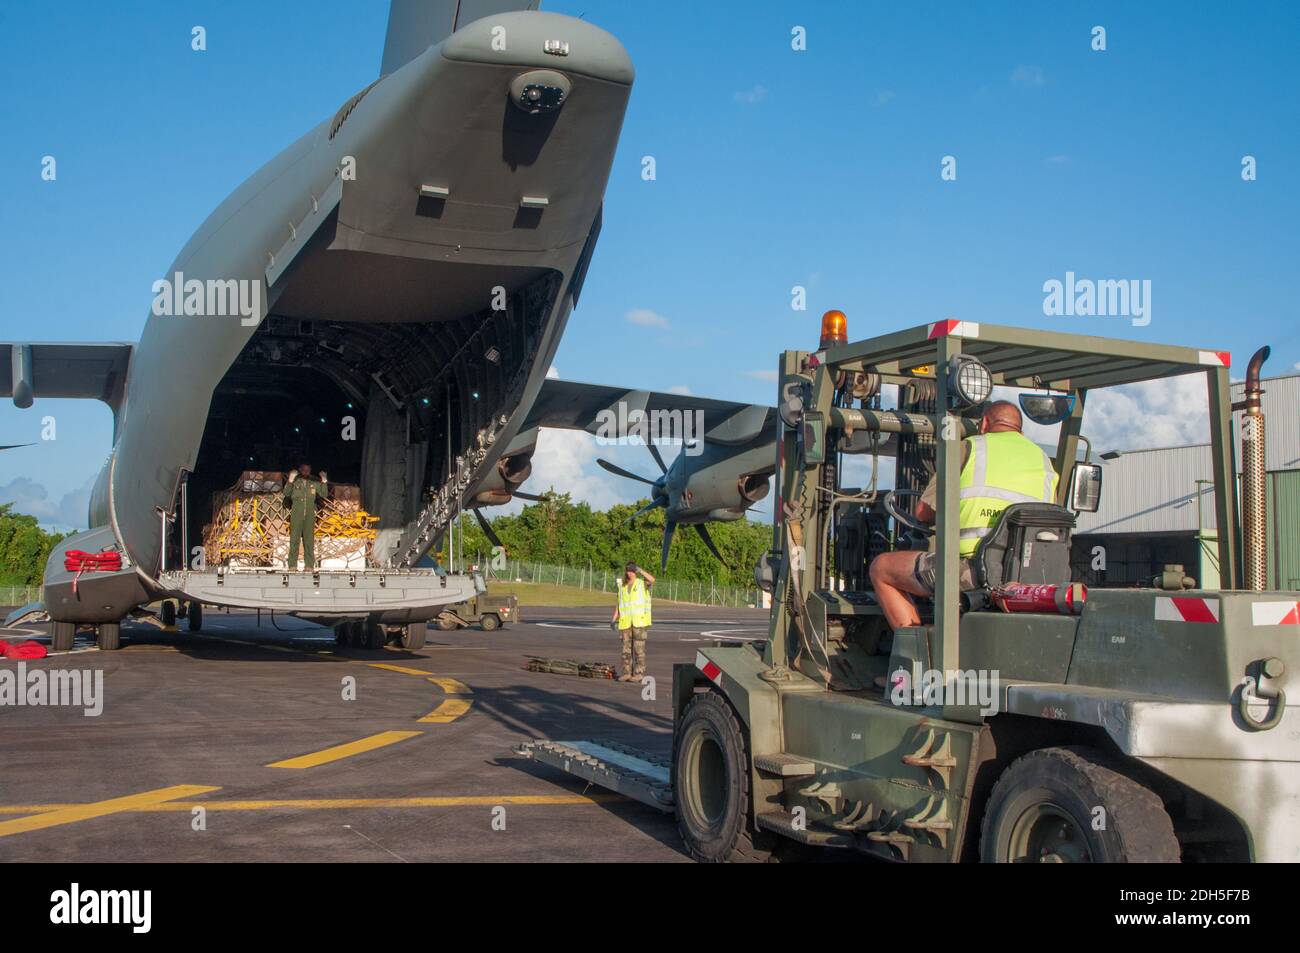 An Airbus A400M military aircraft coming from Orleans, France, landed in  Fort-de France, the capital of France's Caribbean overseas department of  Martinique on September 9, 2017. Onboard, a Puma helicopter and humanitarian